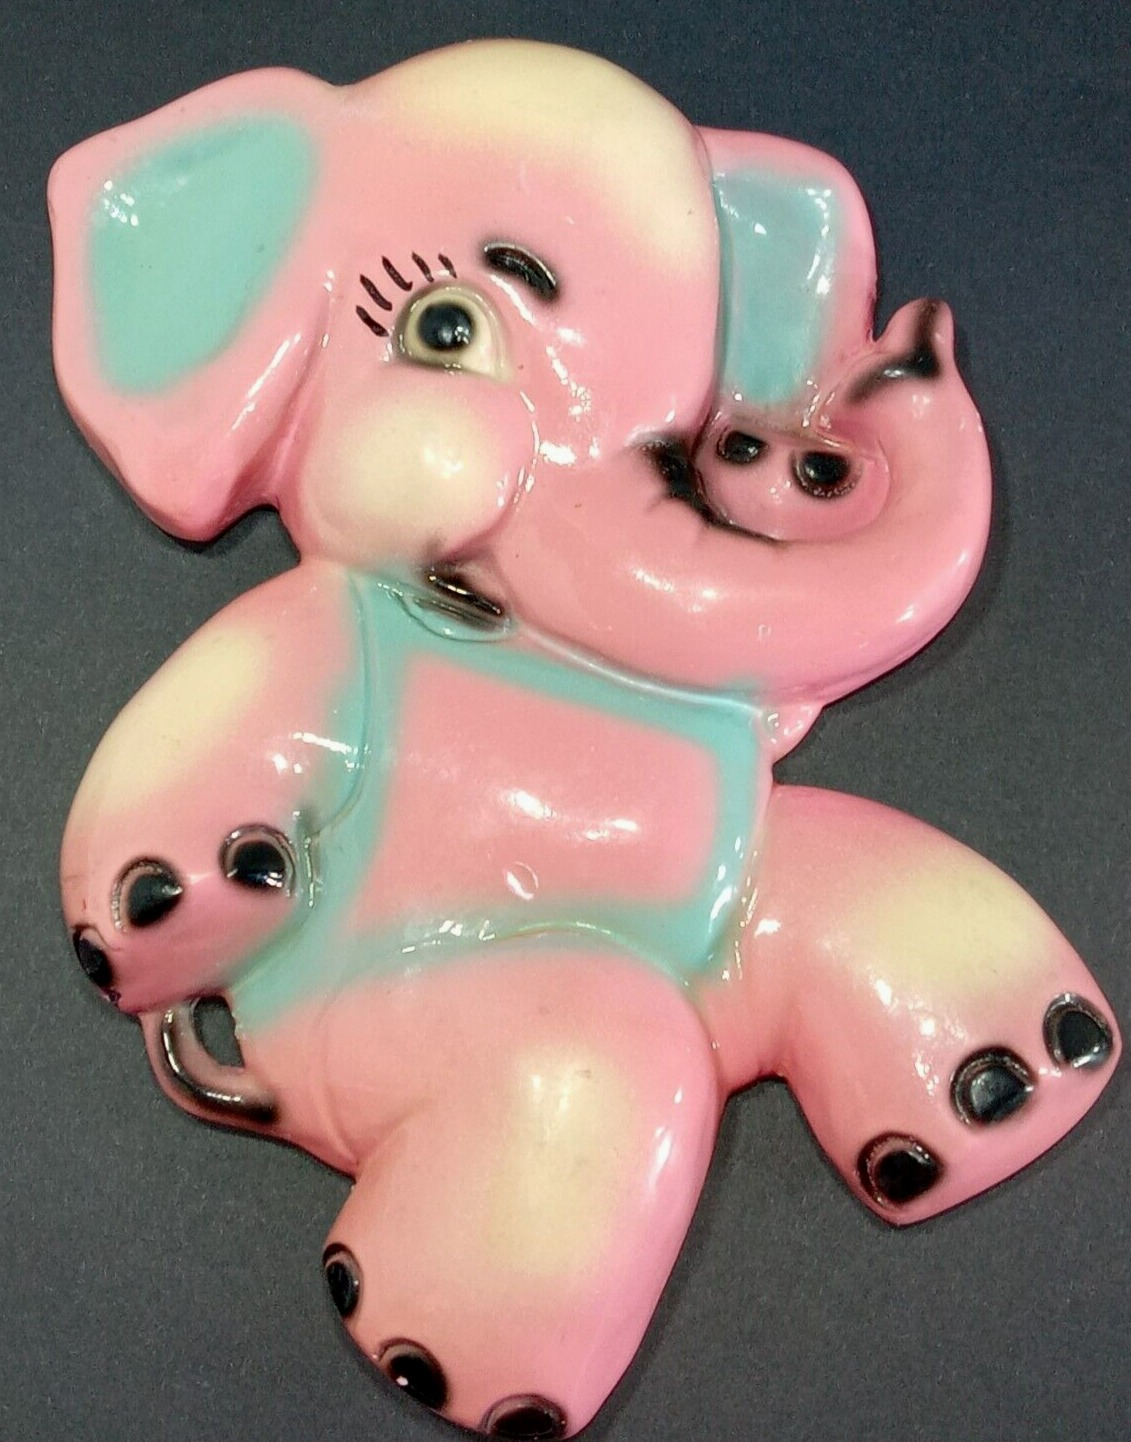 Vintage Kitsch Elephant Chalkware Figure Hand Painted Pink Blue 1950s Wall Hang